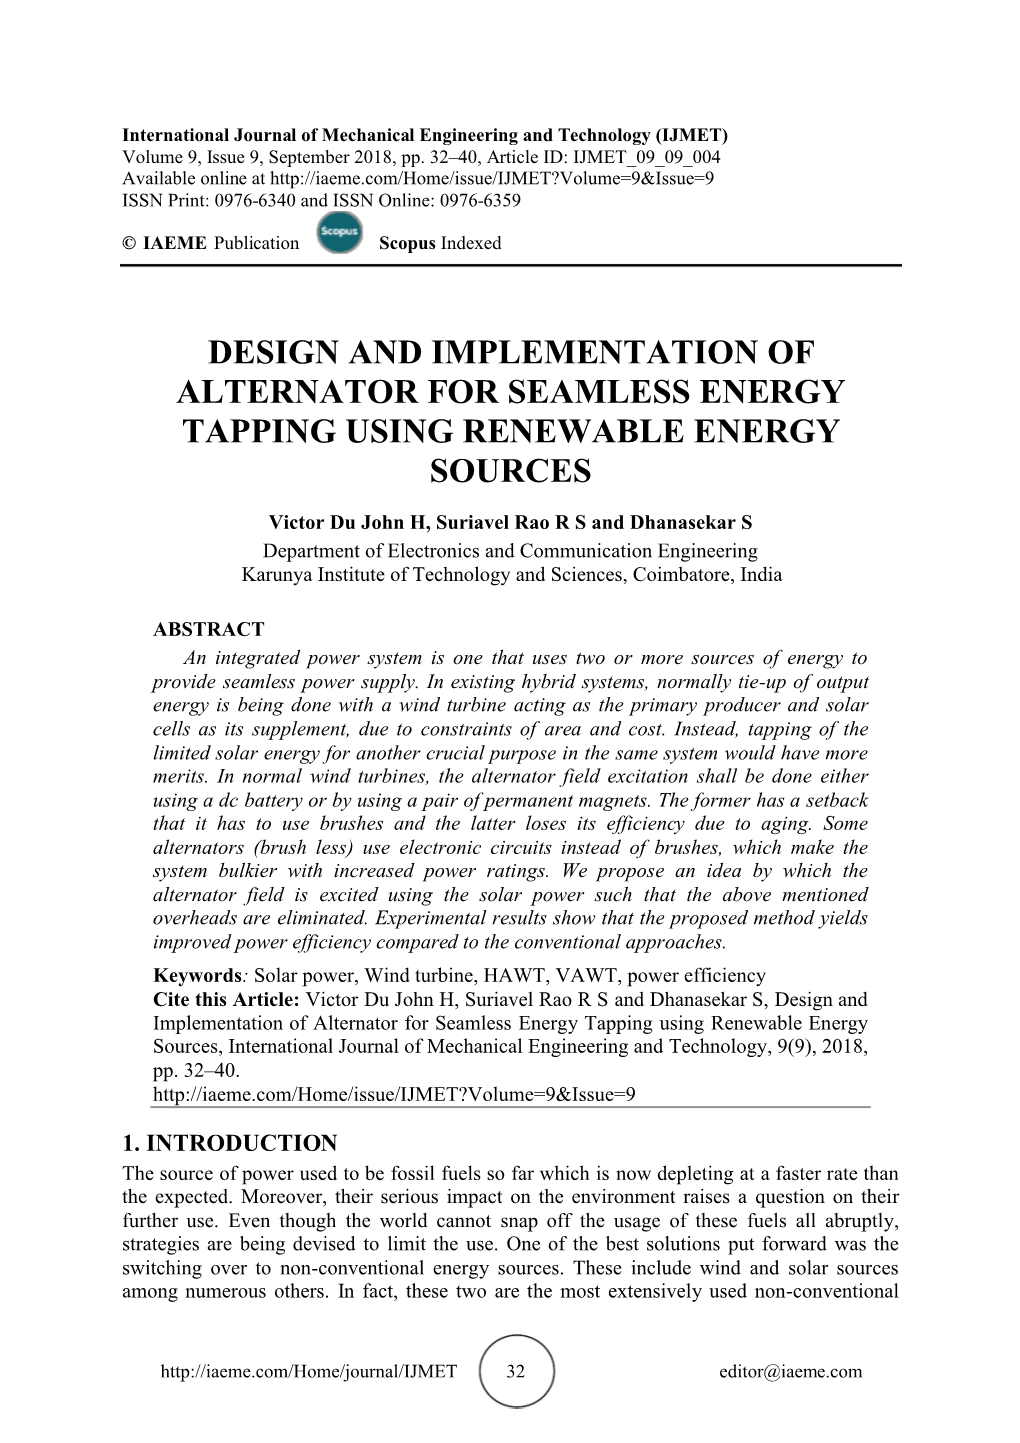 Design and Implementation of Alternator for Seamless Energy Tapping Using Renewable Energy Sources